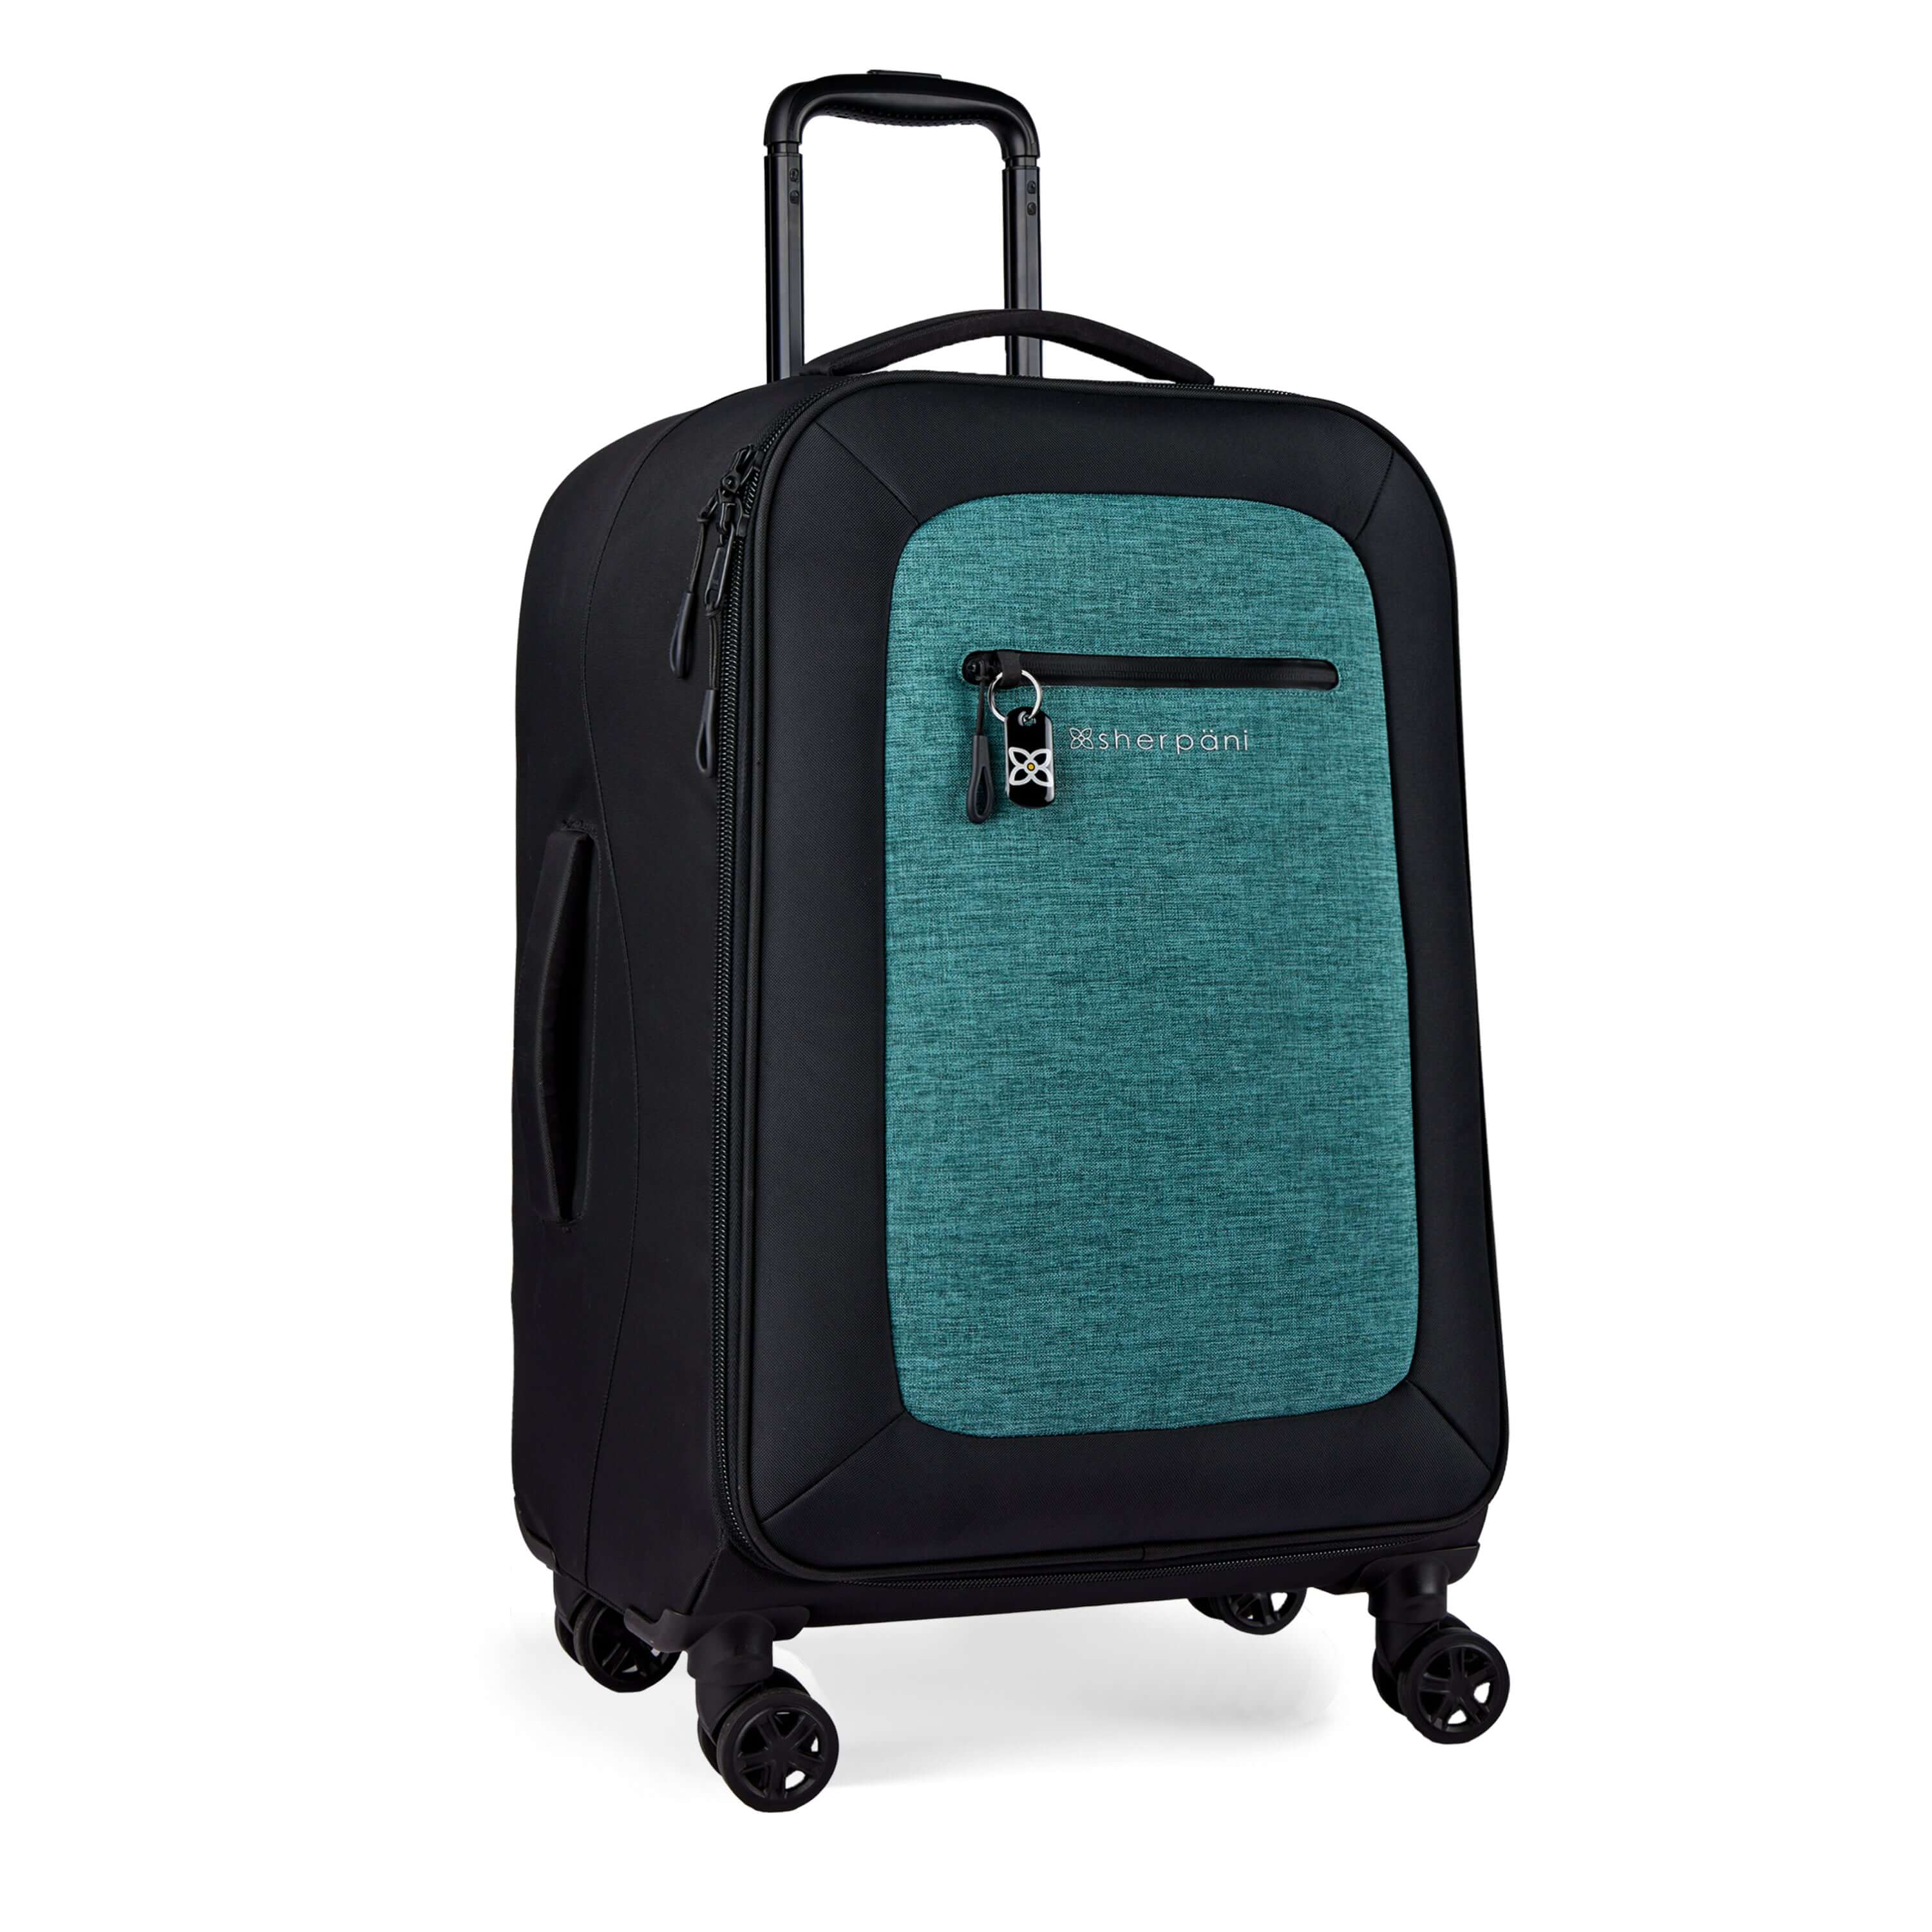 Angled front view of Sherpani’s Anti-Theft luggage the Hemisphere in Teal. The suitcase has a soft shell exterior made from recycled plastic bottles and features vegan leather accents in black. There is a main zipper compartment and an external pocket on the front with a locking zipper and a ReturnMe tag. On the top of the suitcase sits a retractable luggage handle. On the top and side sit two easy-access handles. At the bottom are four 36-degree spinner wheels for smooth rolling. #color_teal